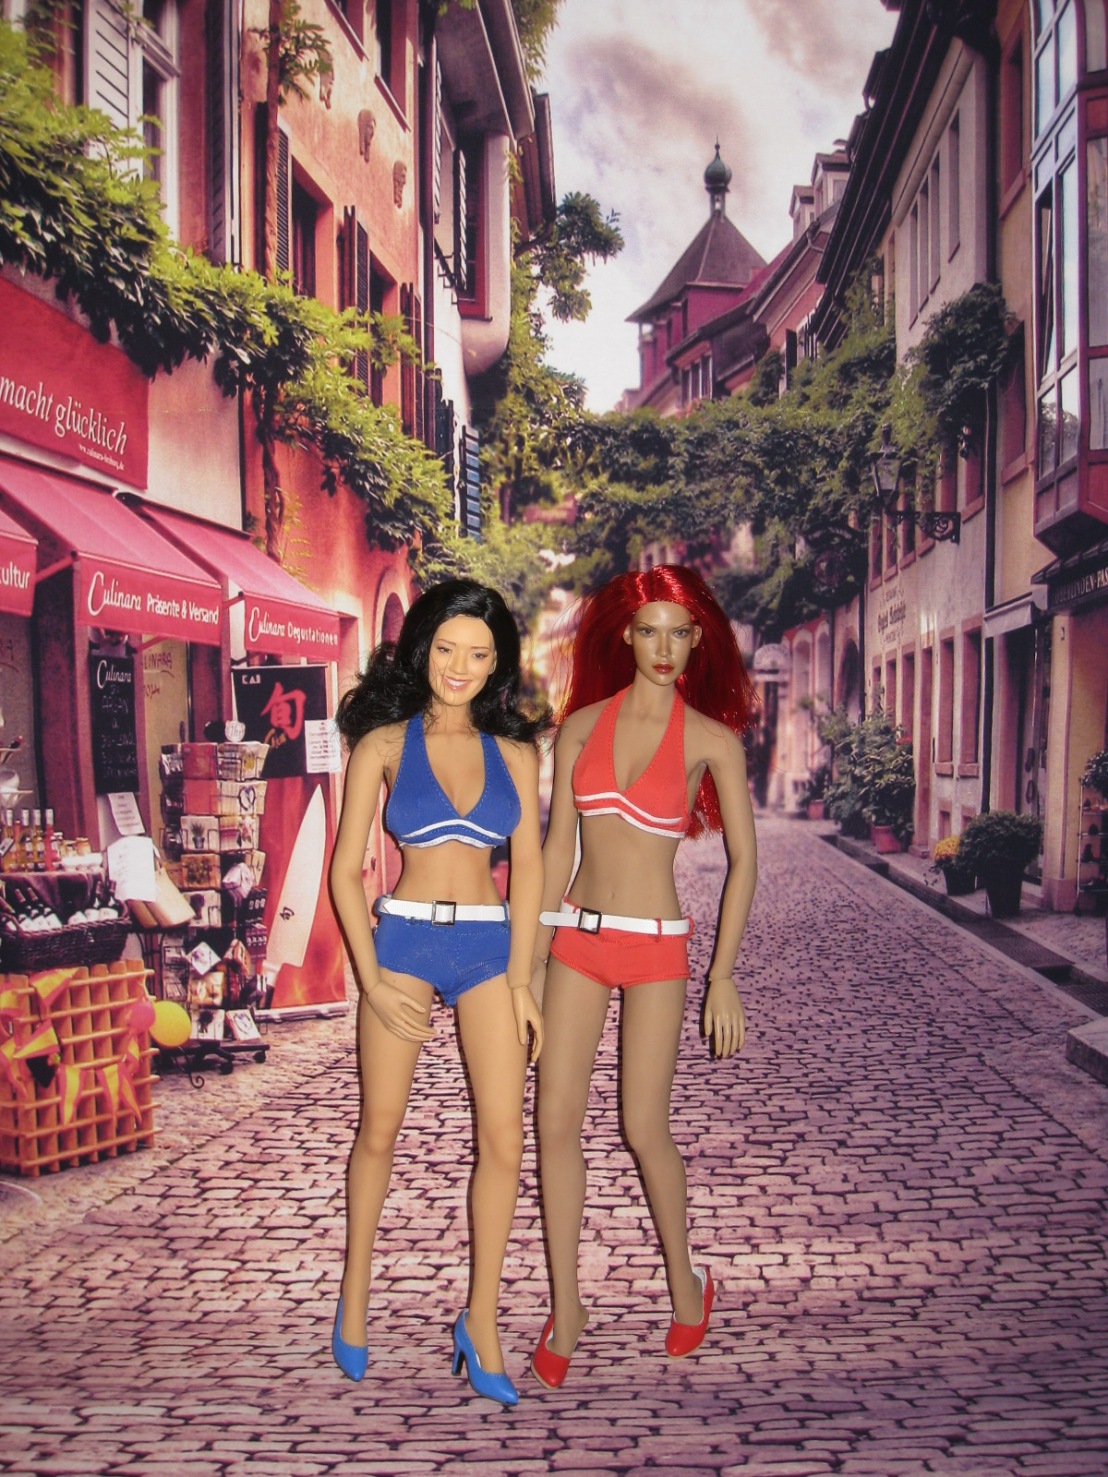 Lien and Eva Marie